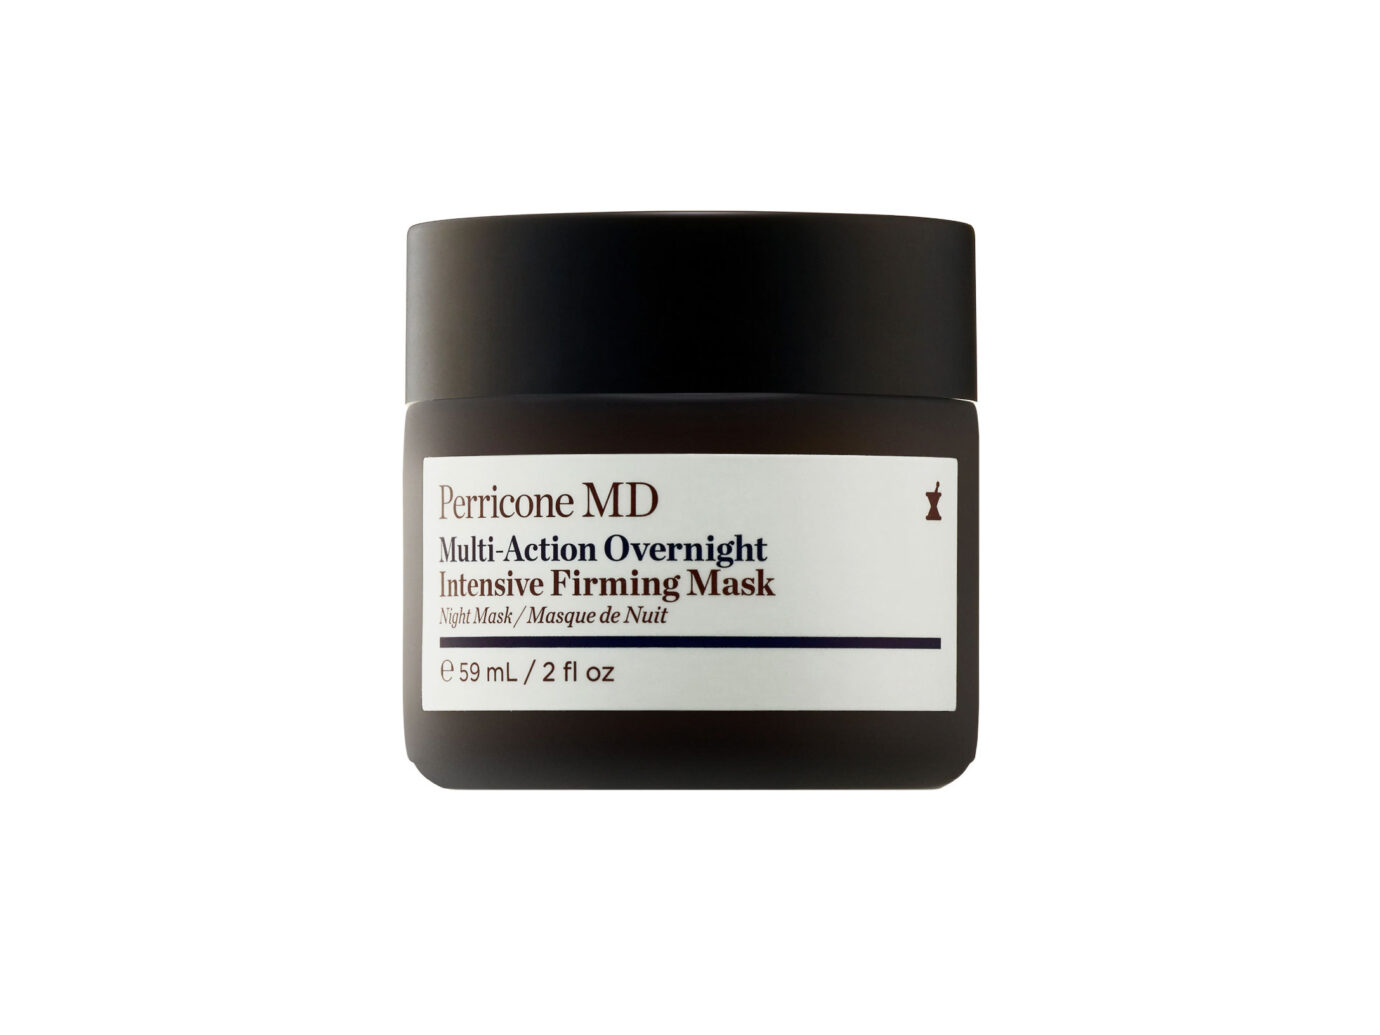 PERRICONE MD Multi-Action Overnight Intensive Firming Mask